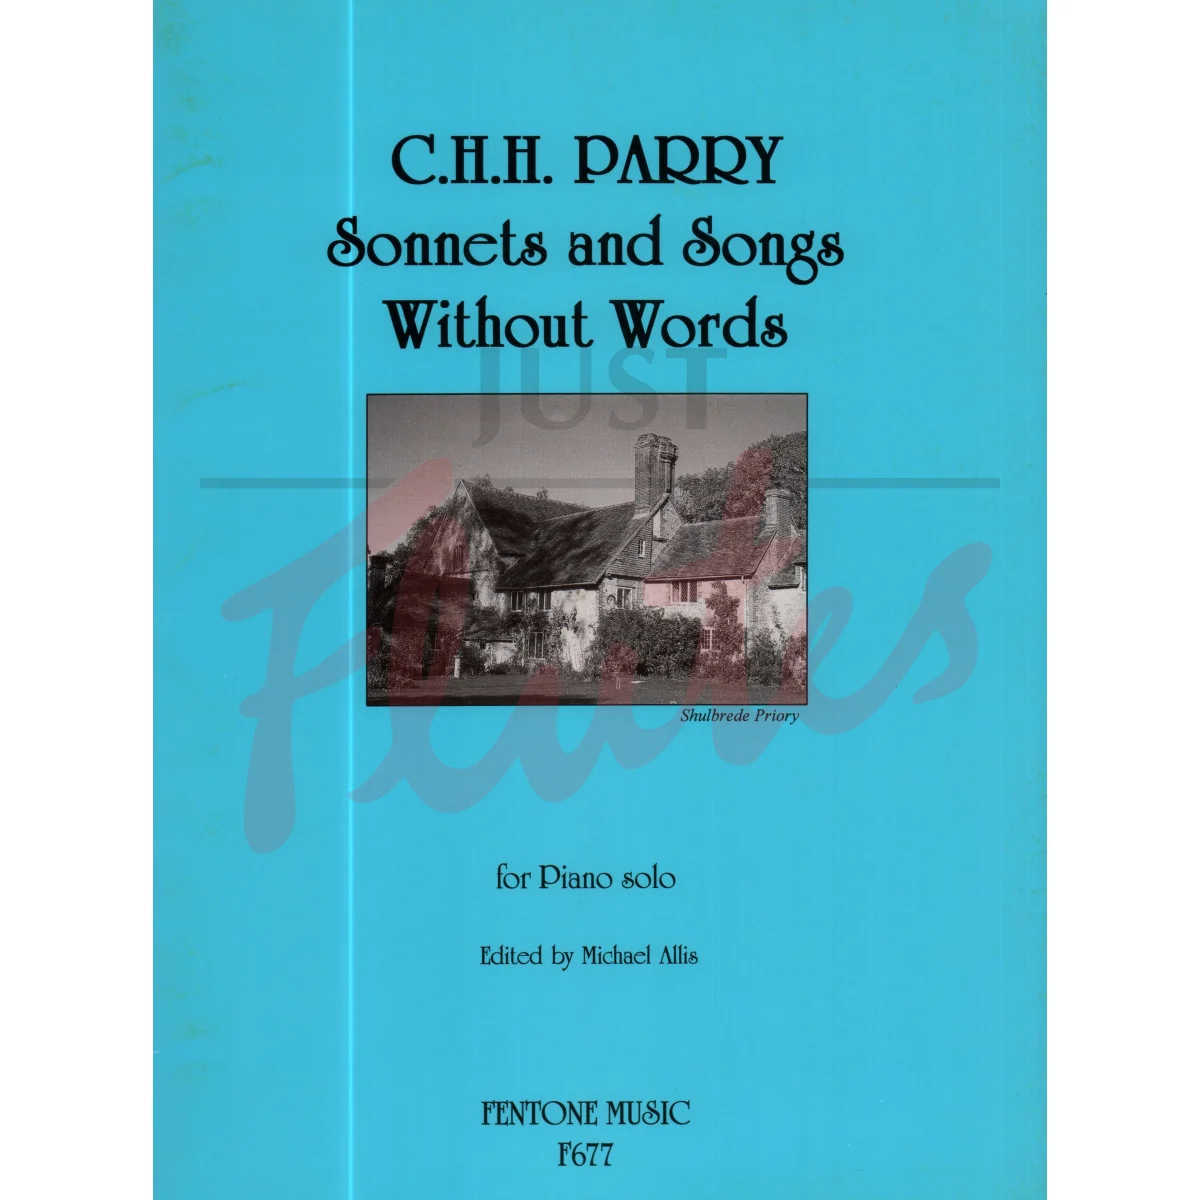 Sonnets and Songs without Words for Piano